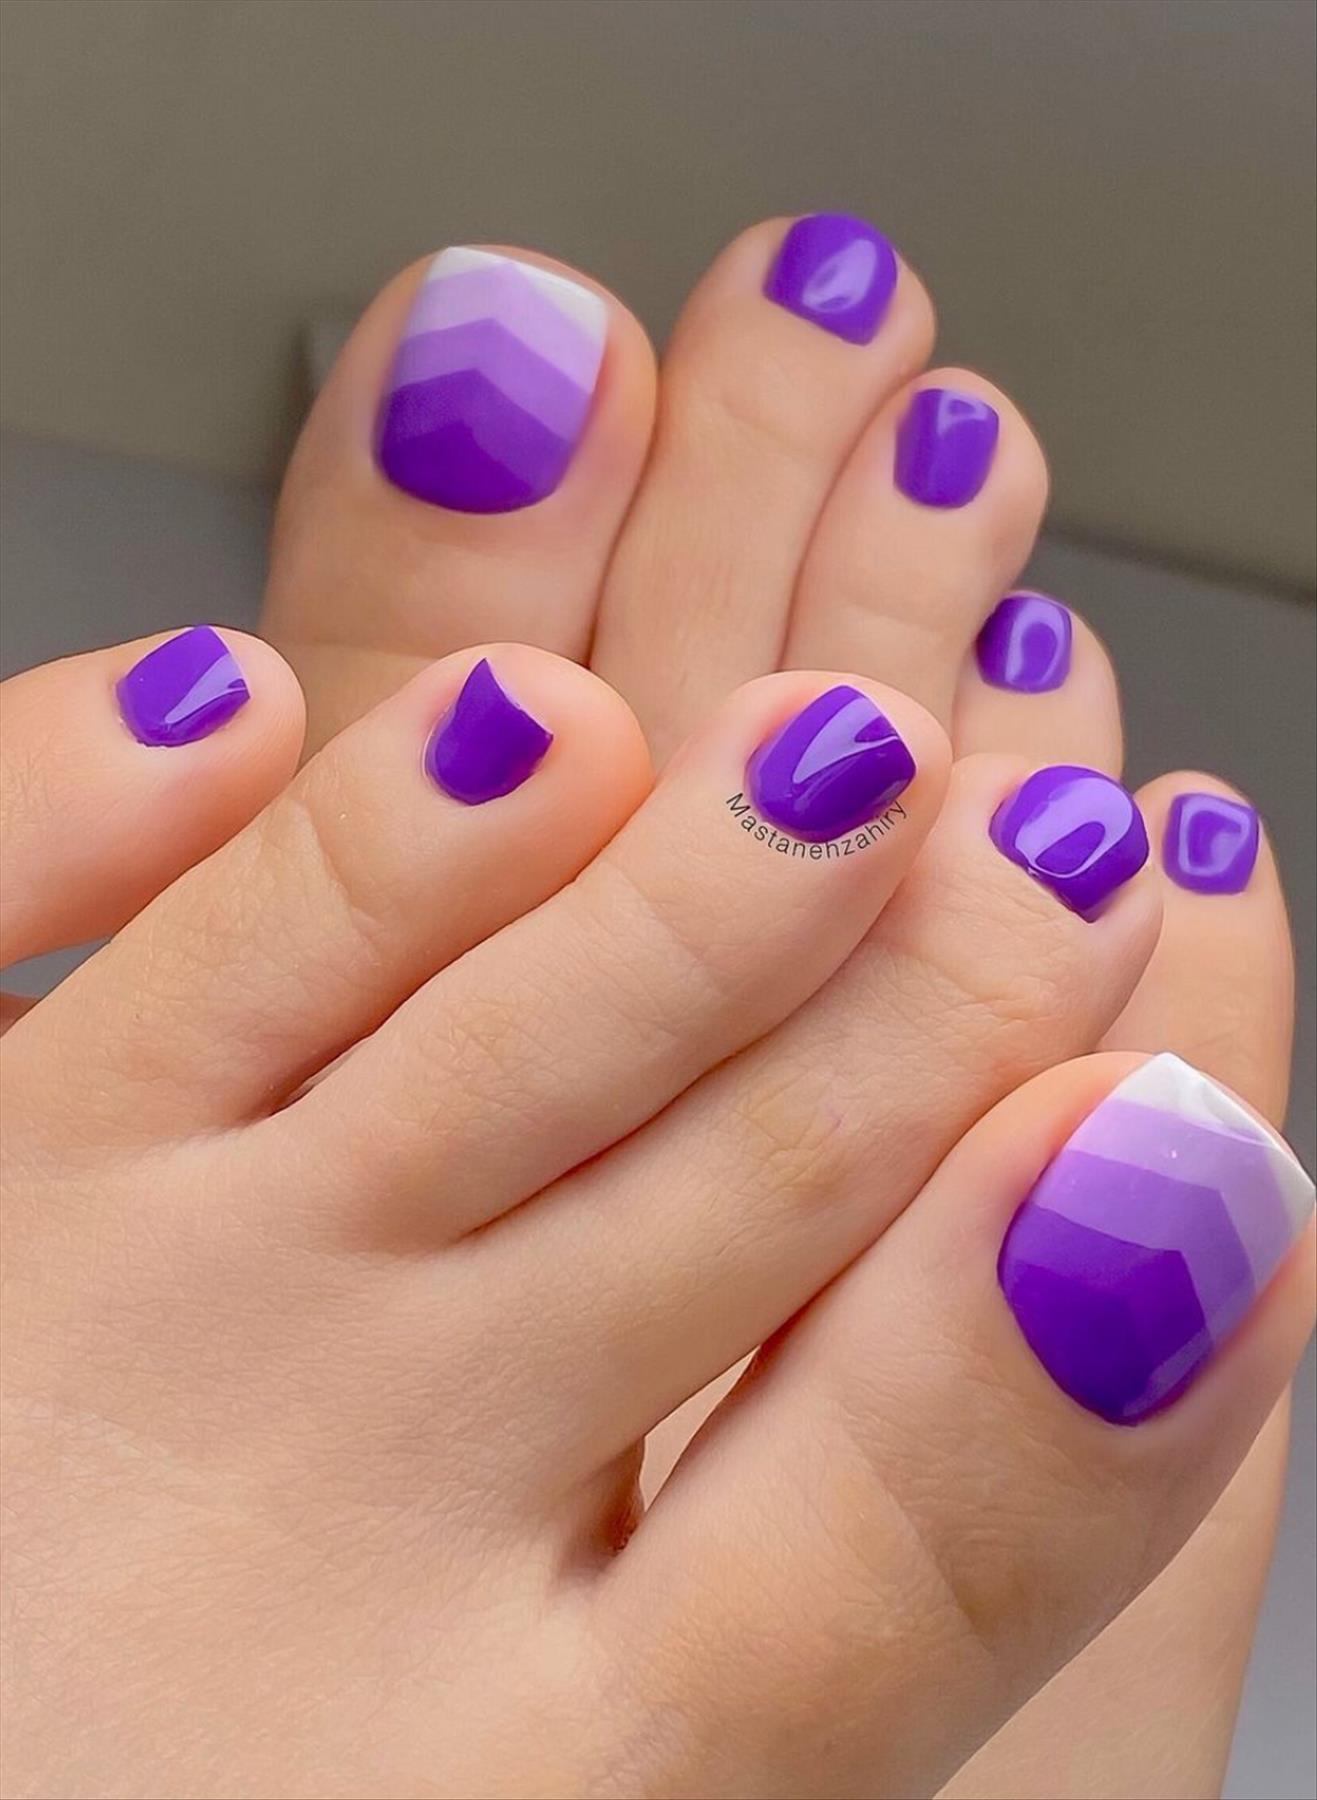 Cute Summer toe nails and pedicure ideas to wear